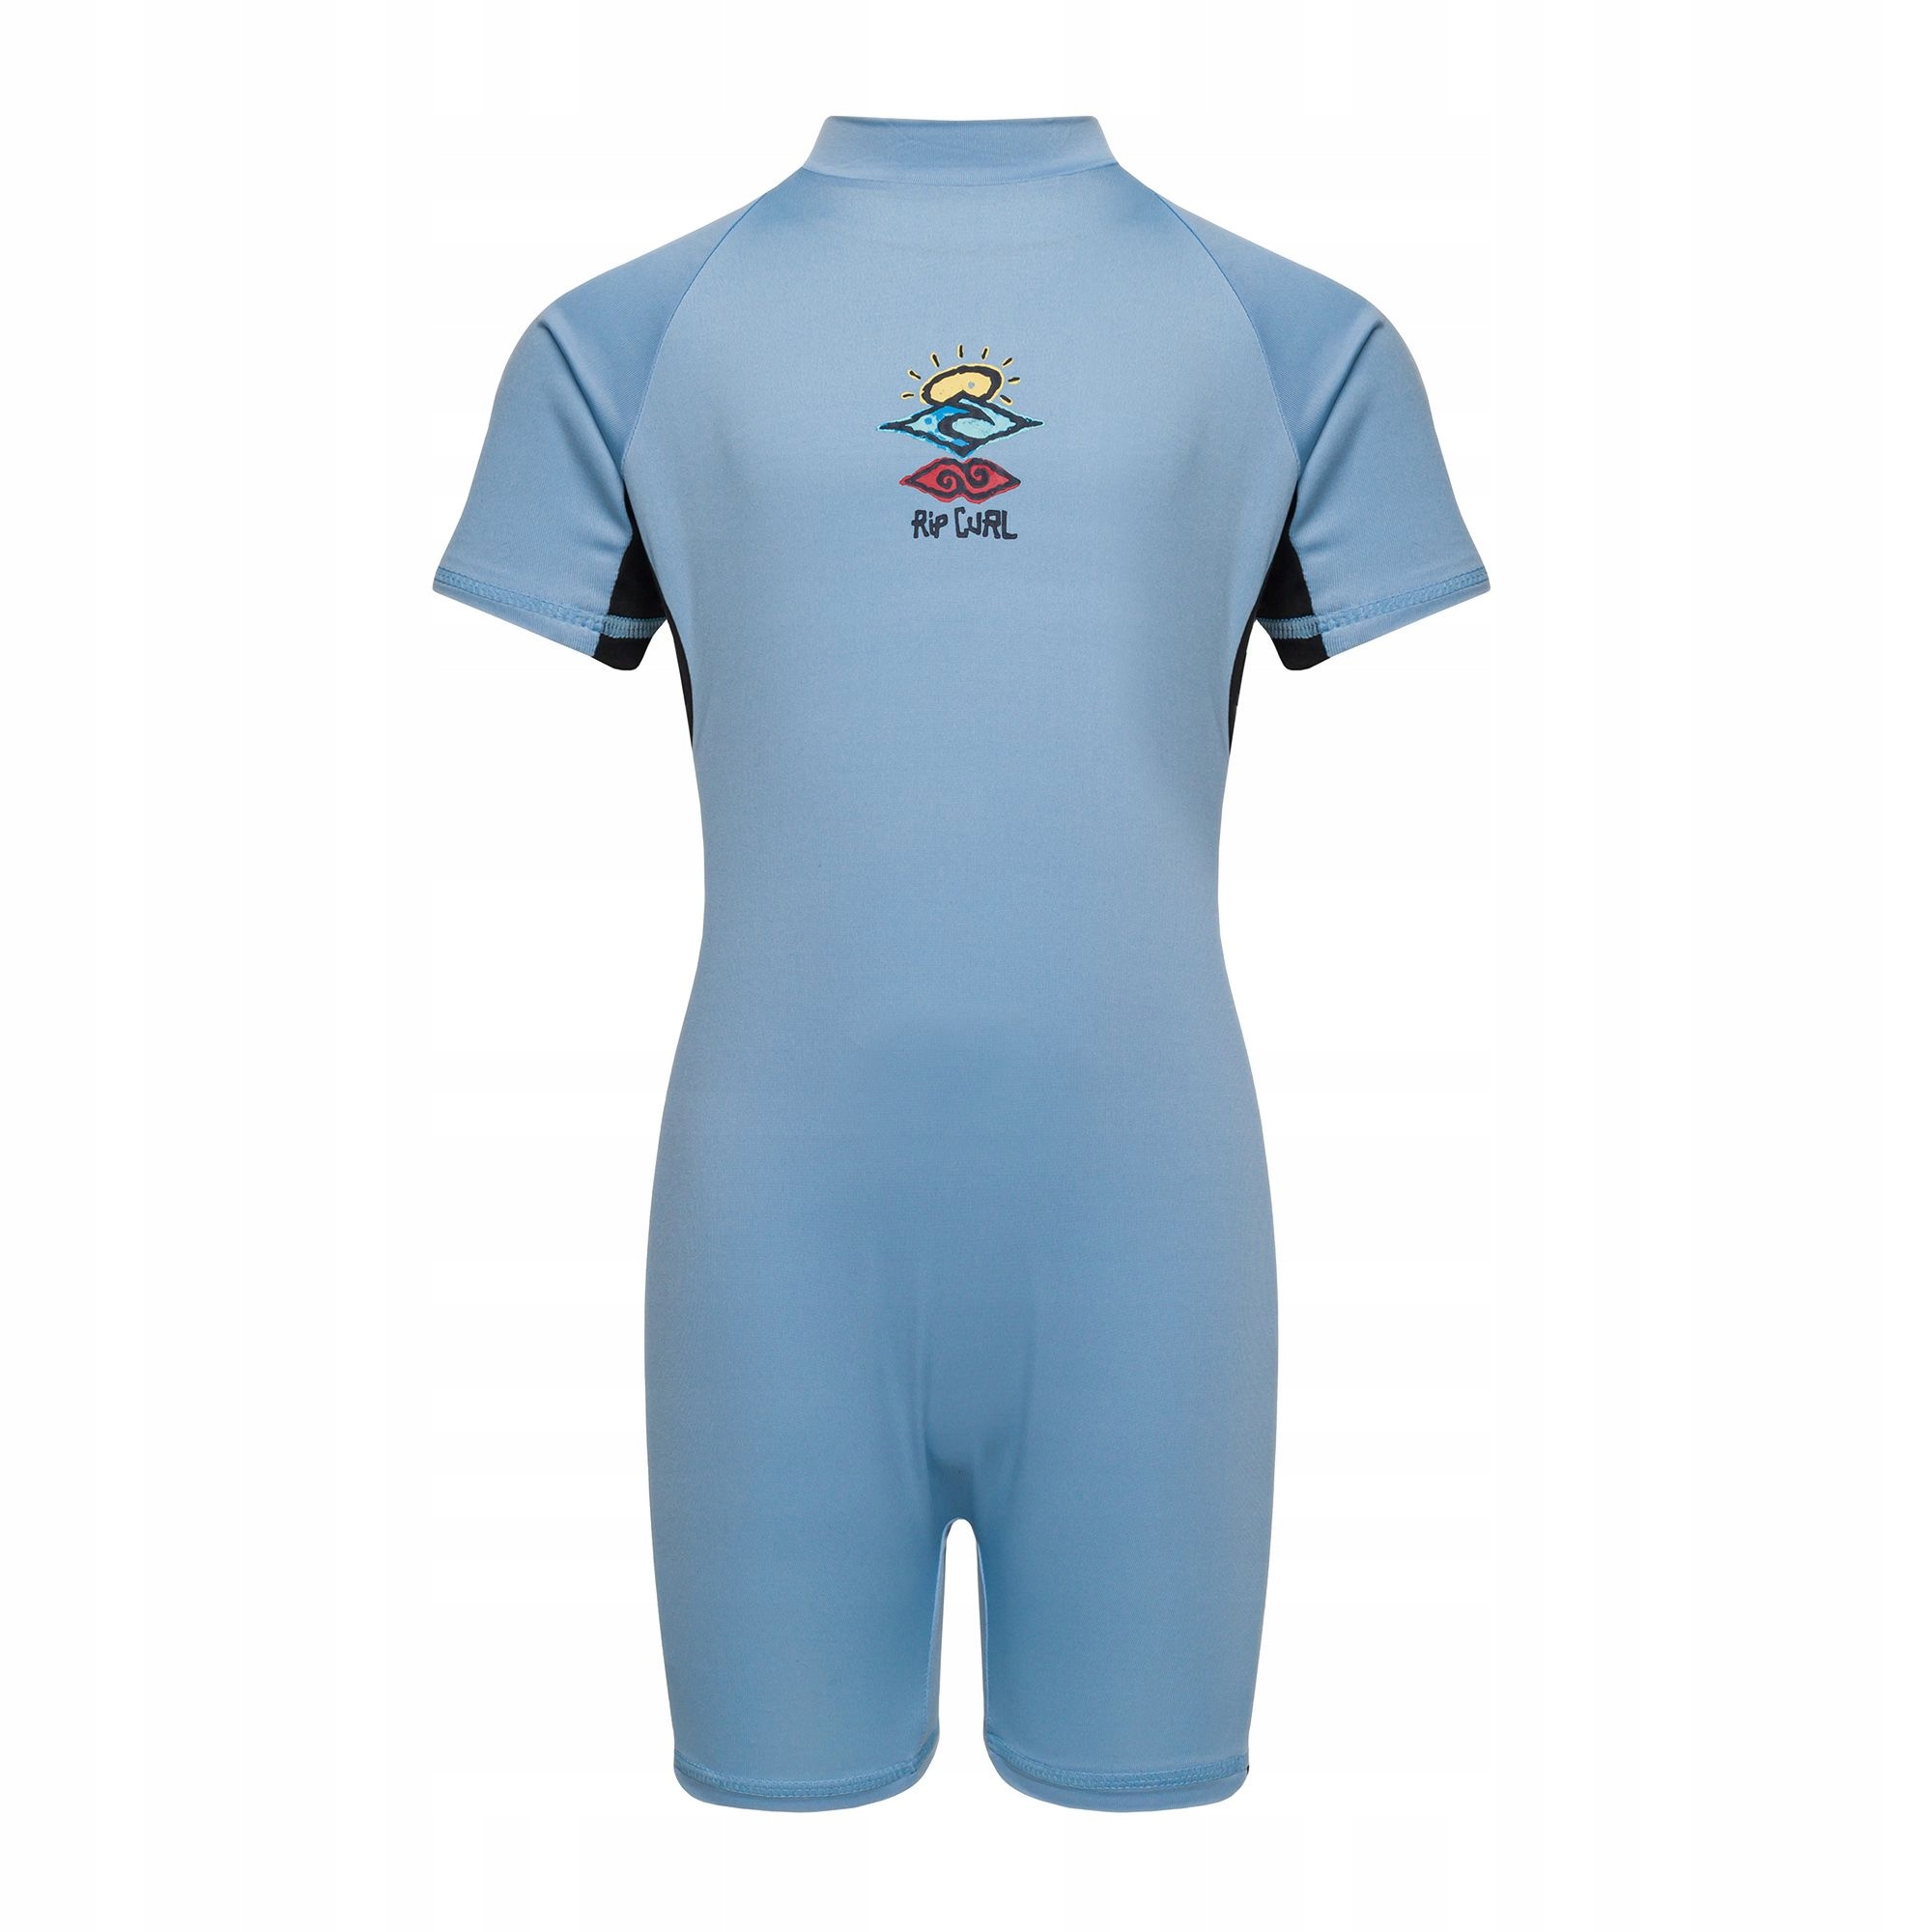 Detský overal Rip Curl Cosmic Spring Suit